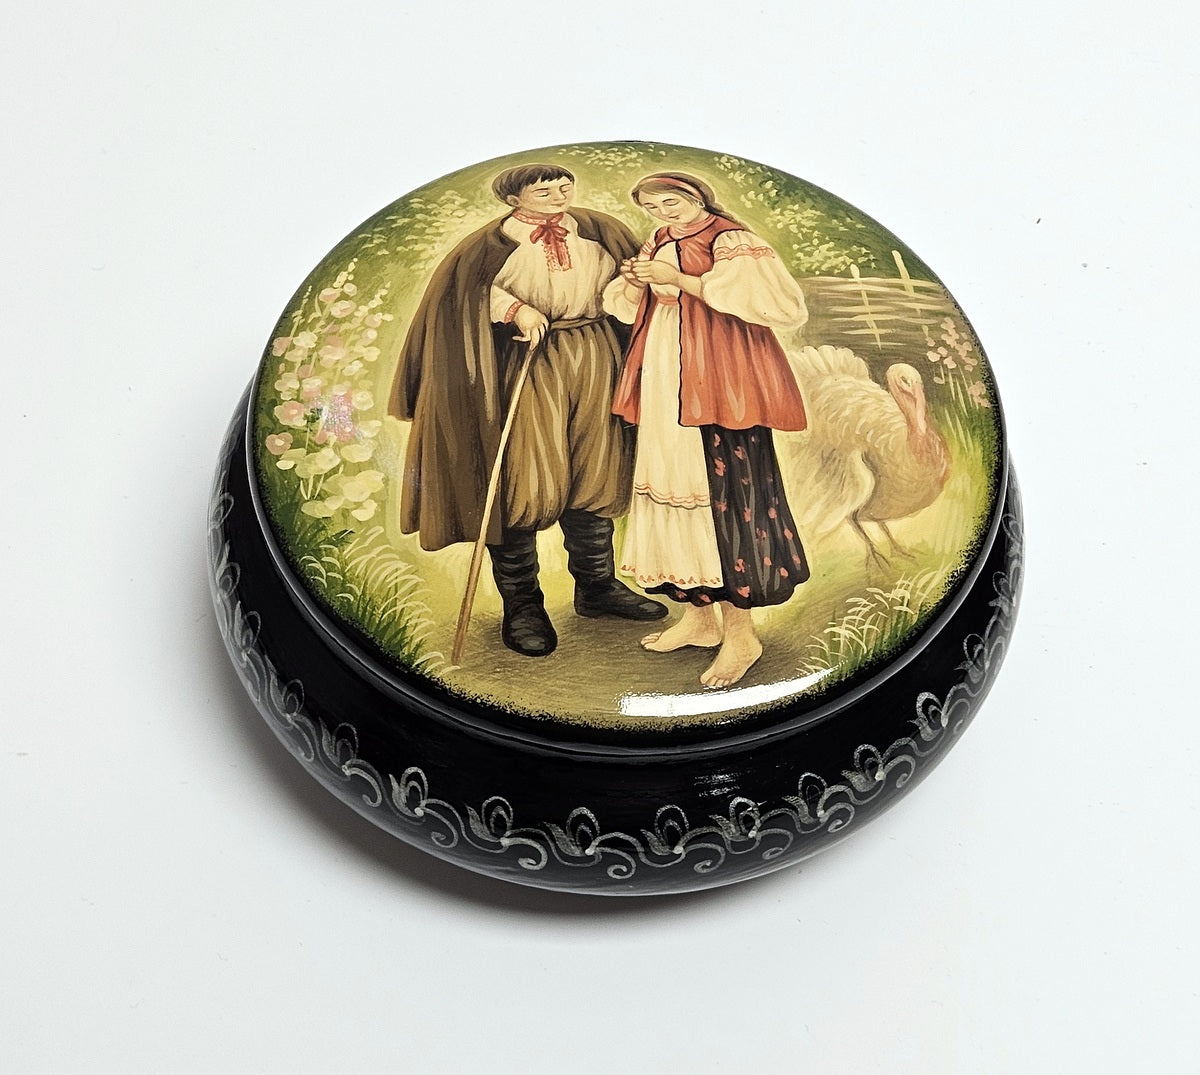 Jewelry Box with Boy and Girl